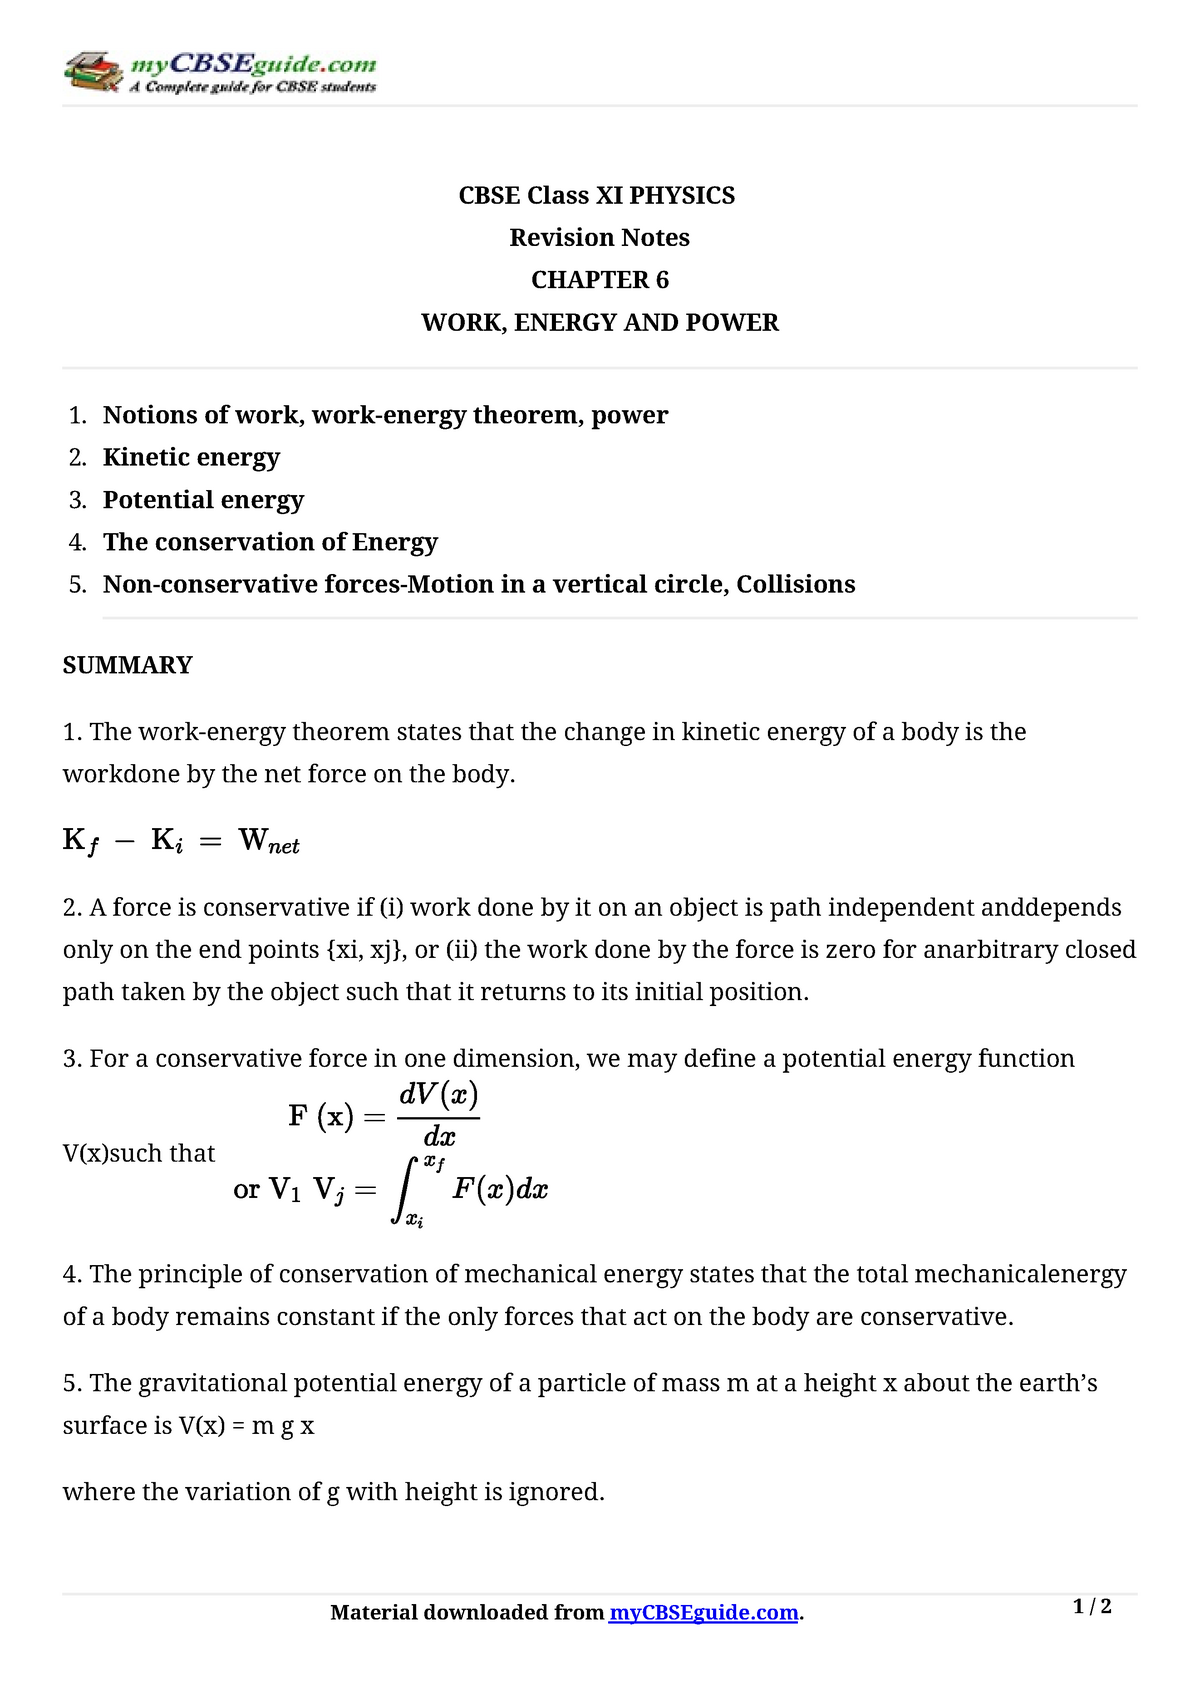 The work – energy theorem states that